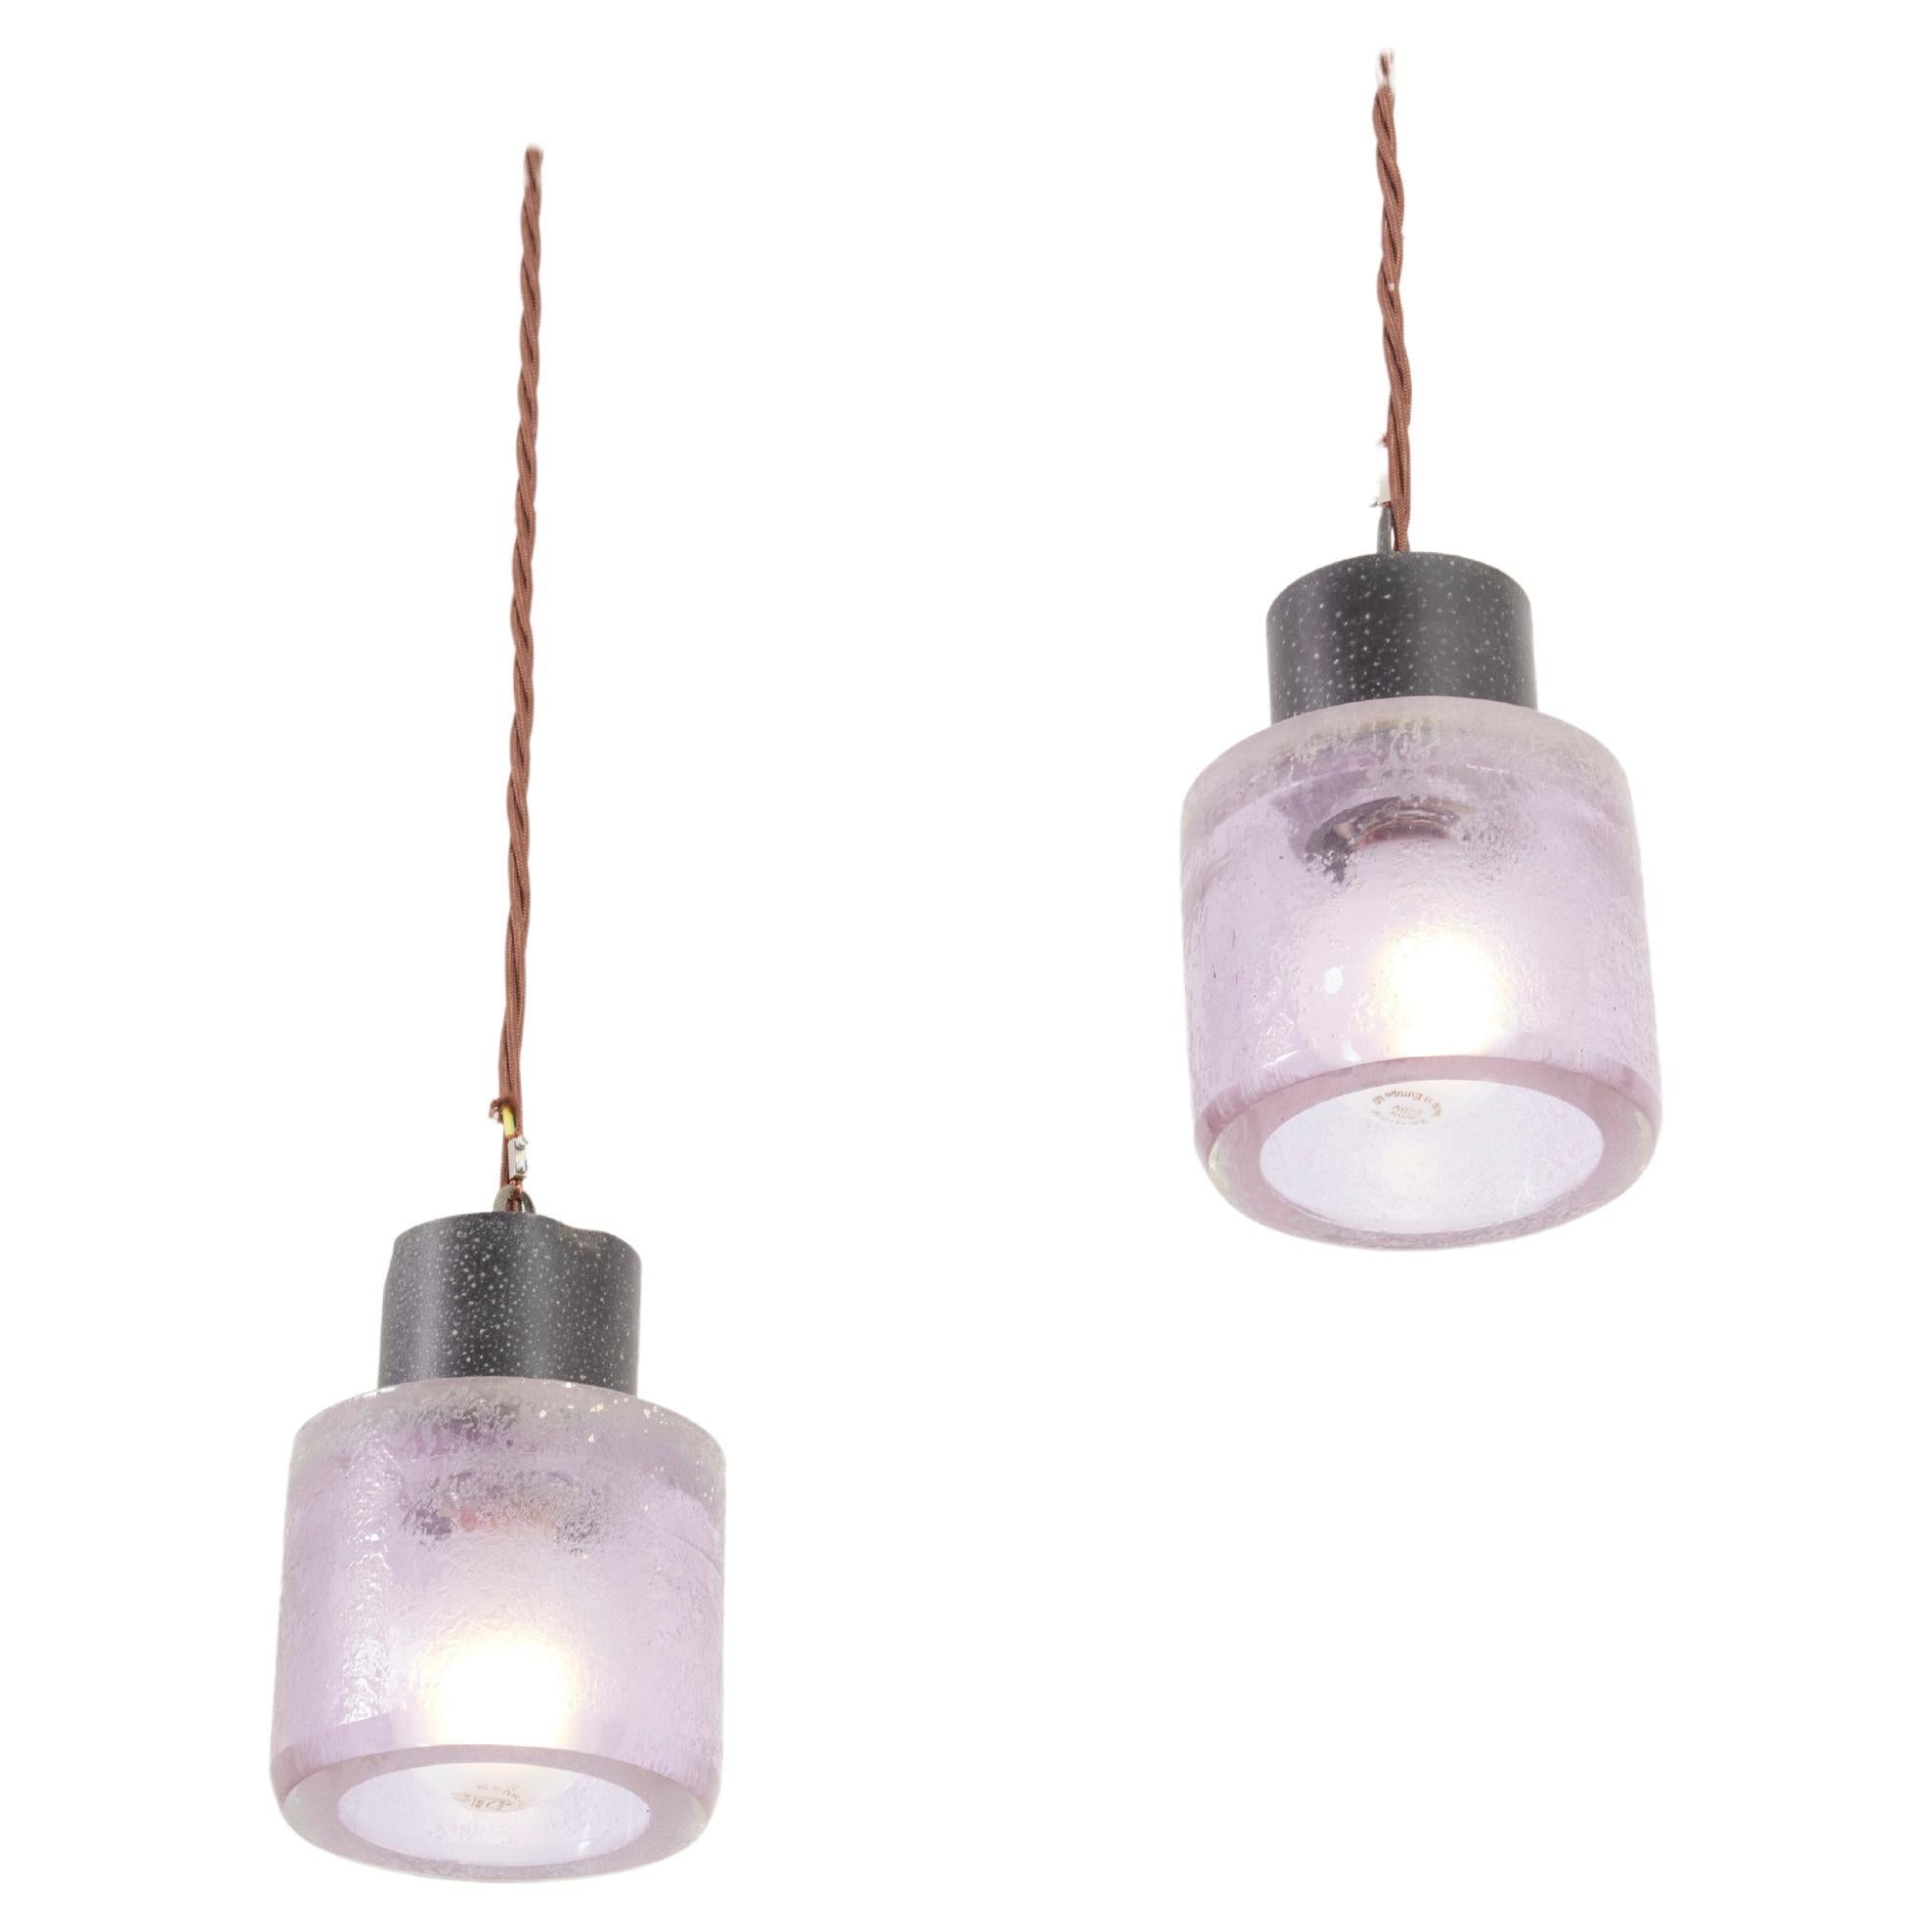 Rare pair of Seguso Vetri d'Arte pendant lamps by Flavio Poli for Scavo Corroso.
Italy 1950s. Made out of Alexandrit Glass. One of the metal pieces on top the glass has some little bents.
2x E27 Fittings.